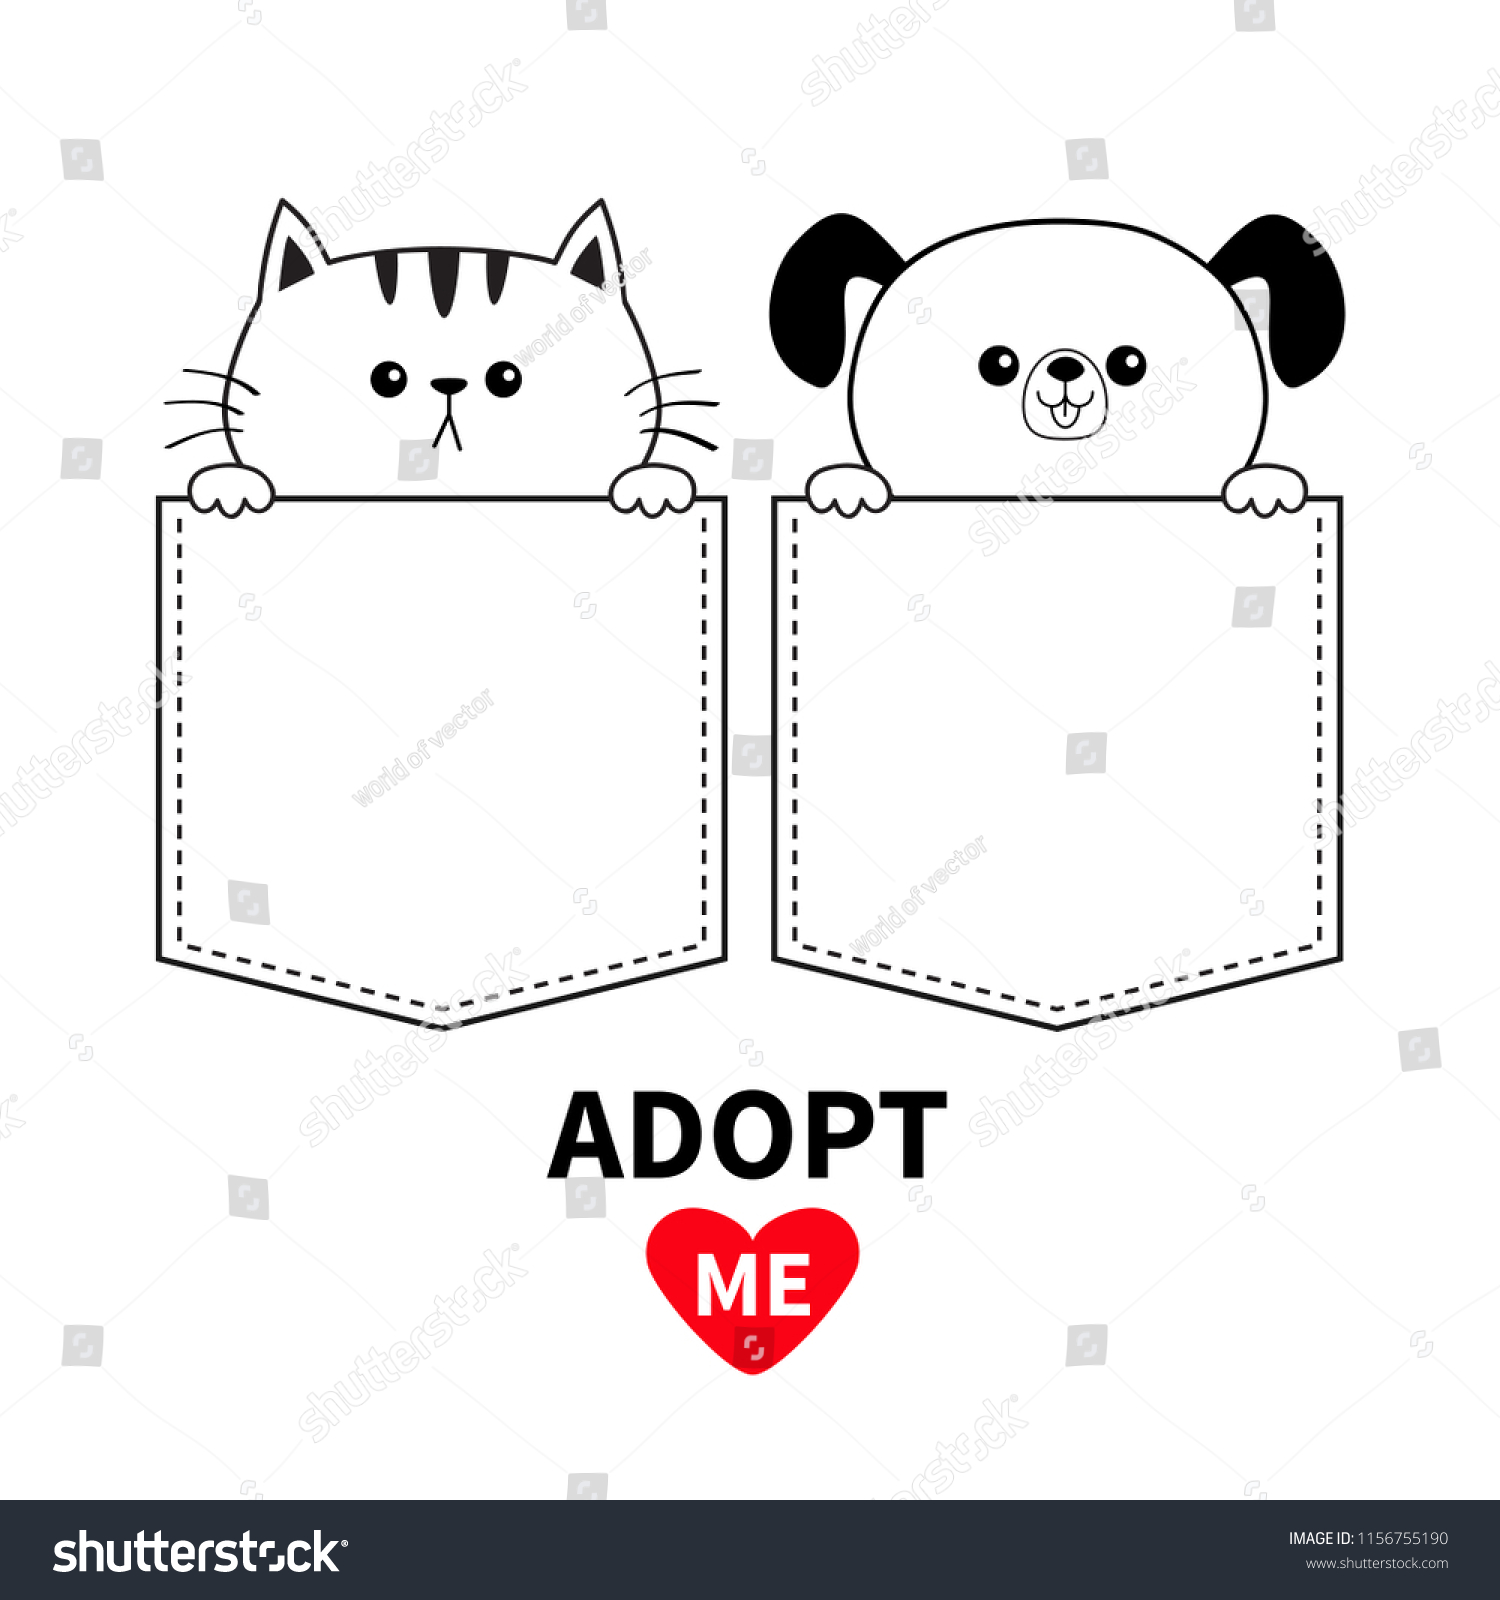 SVG of Adopt me. Red heart. Cute cat dog in the pocket. Holding hands paws. Kitten kitty puppy character. Dash line. Pet animal collection. T-shirt design. Baby background Flat design Vector svg